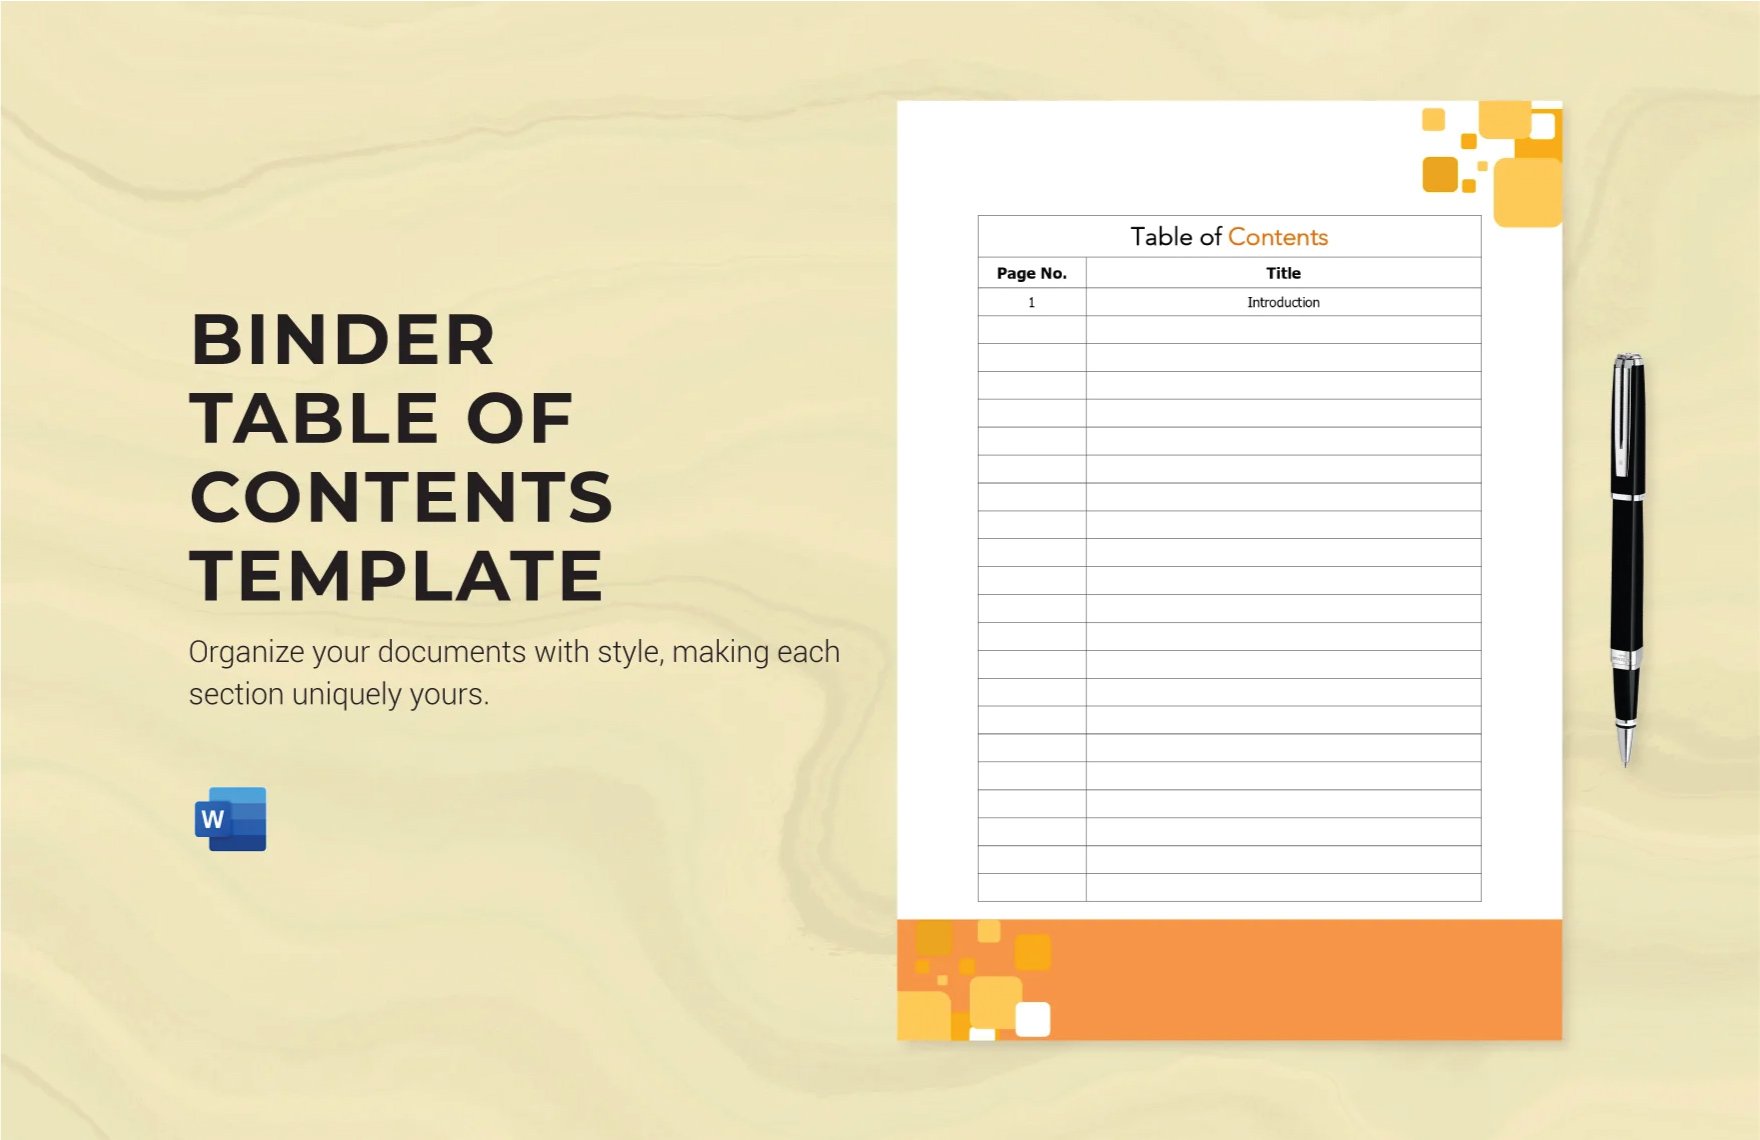 Free Binder Table of Contents Template in Word